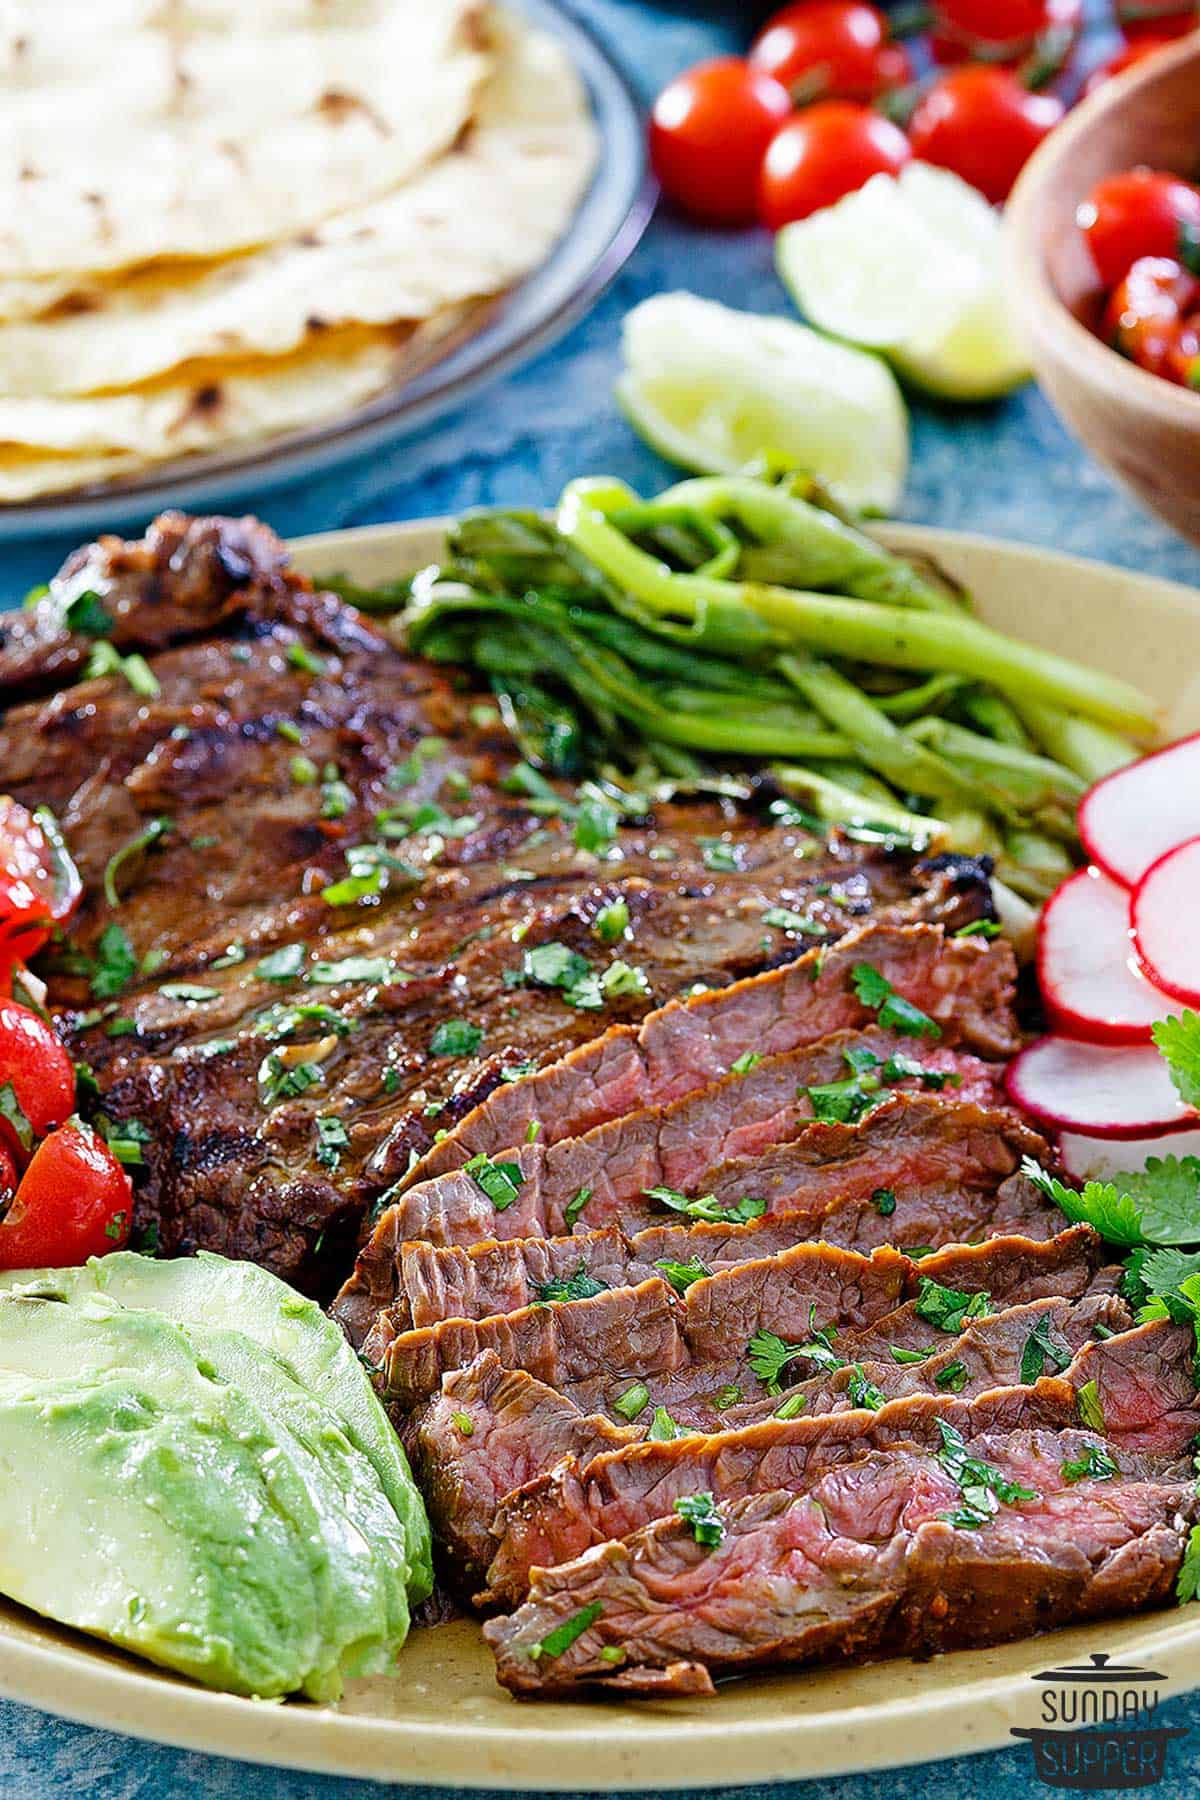 a dinner plate filled with carne asada, avocado, and radish